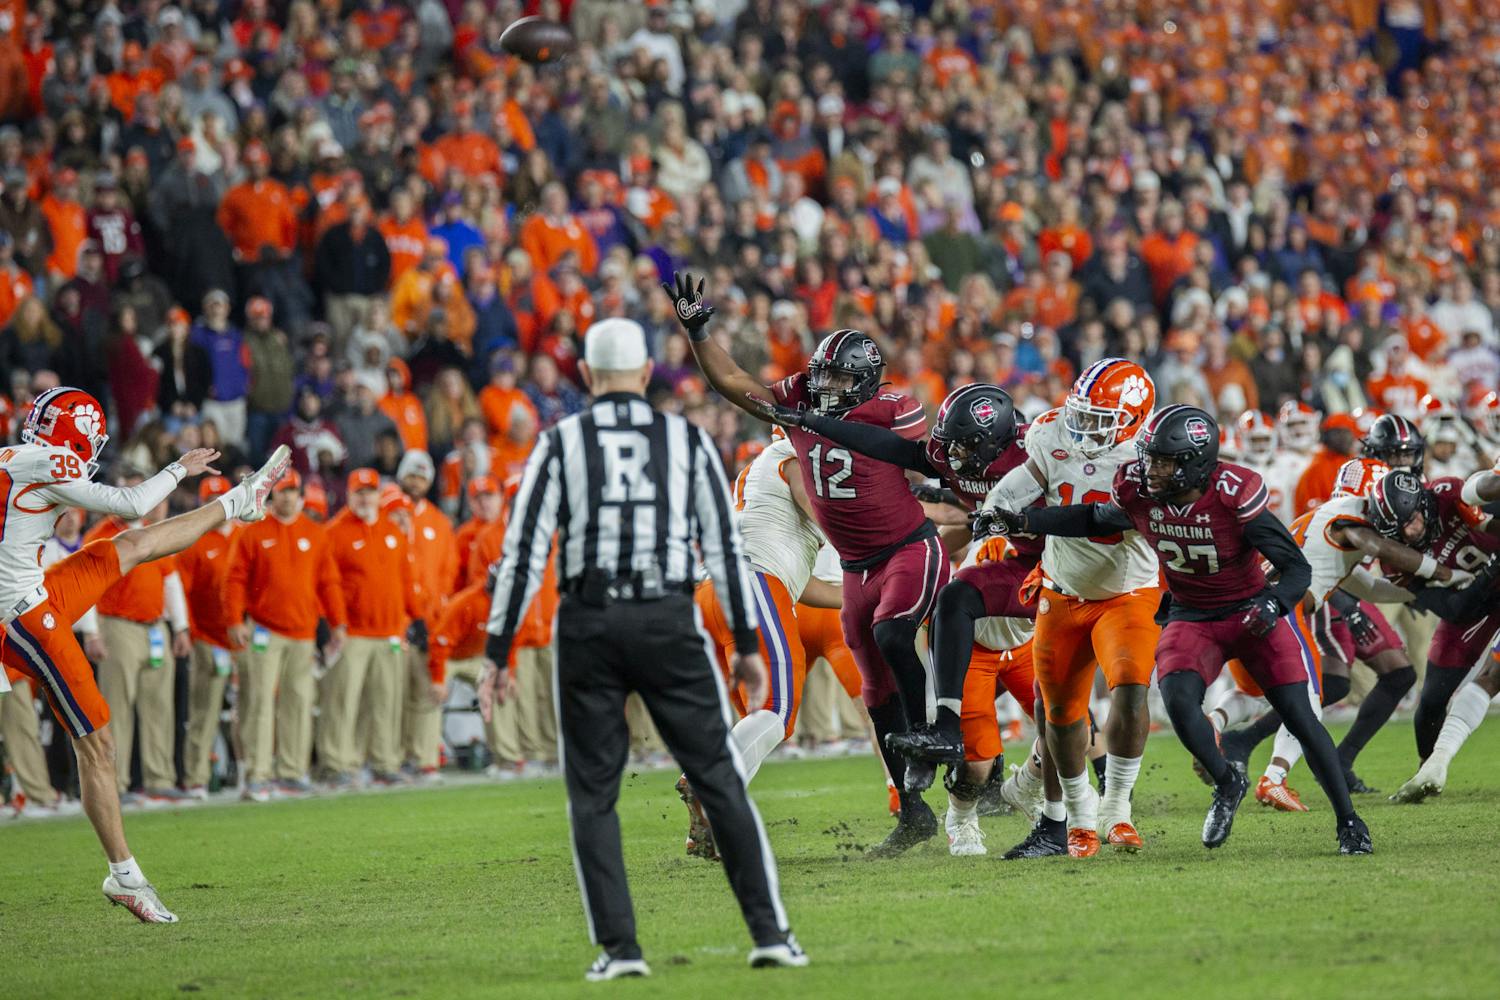 The University of South Carolina matches up against Clemson University for the 120th annual Palmetto Bowl on Nov. 25, 2023, at Williams-Brice Stadium. The Tigers took the lead and never looked back, defeating the Gamecocks 16-7.&nbsp;